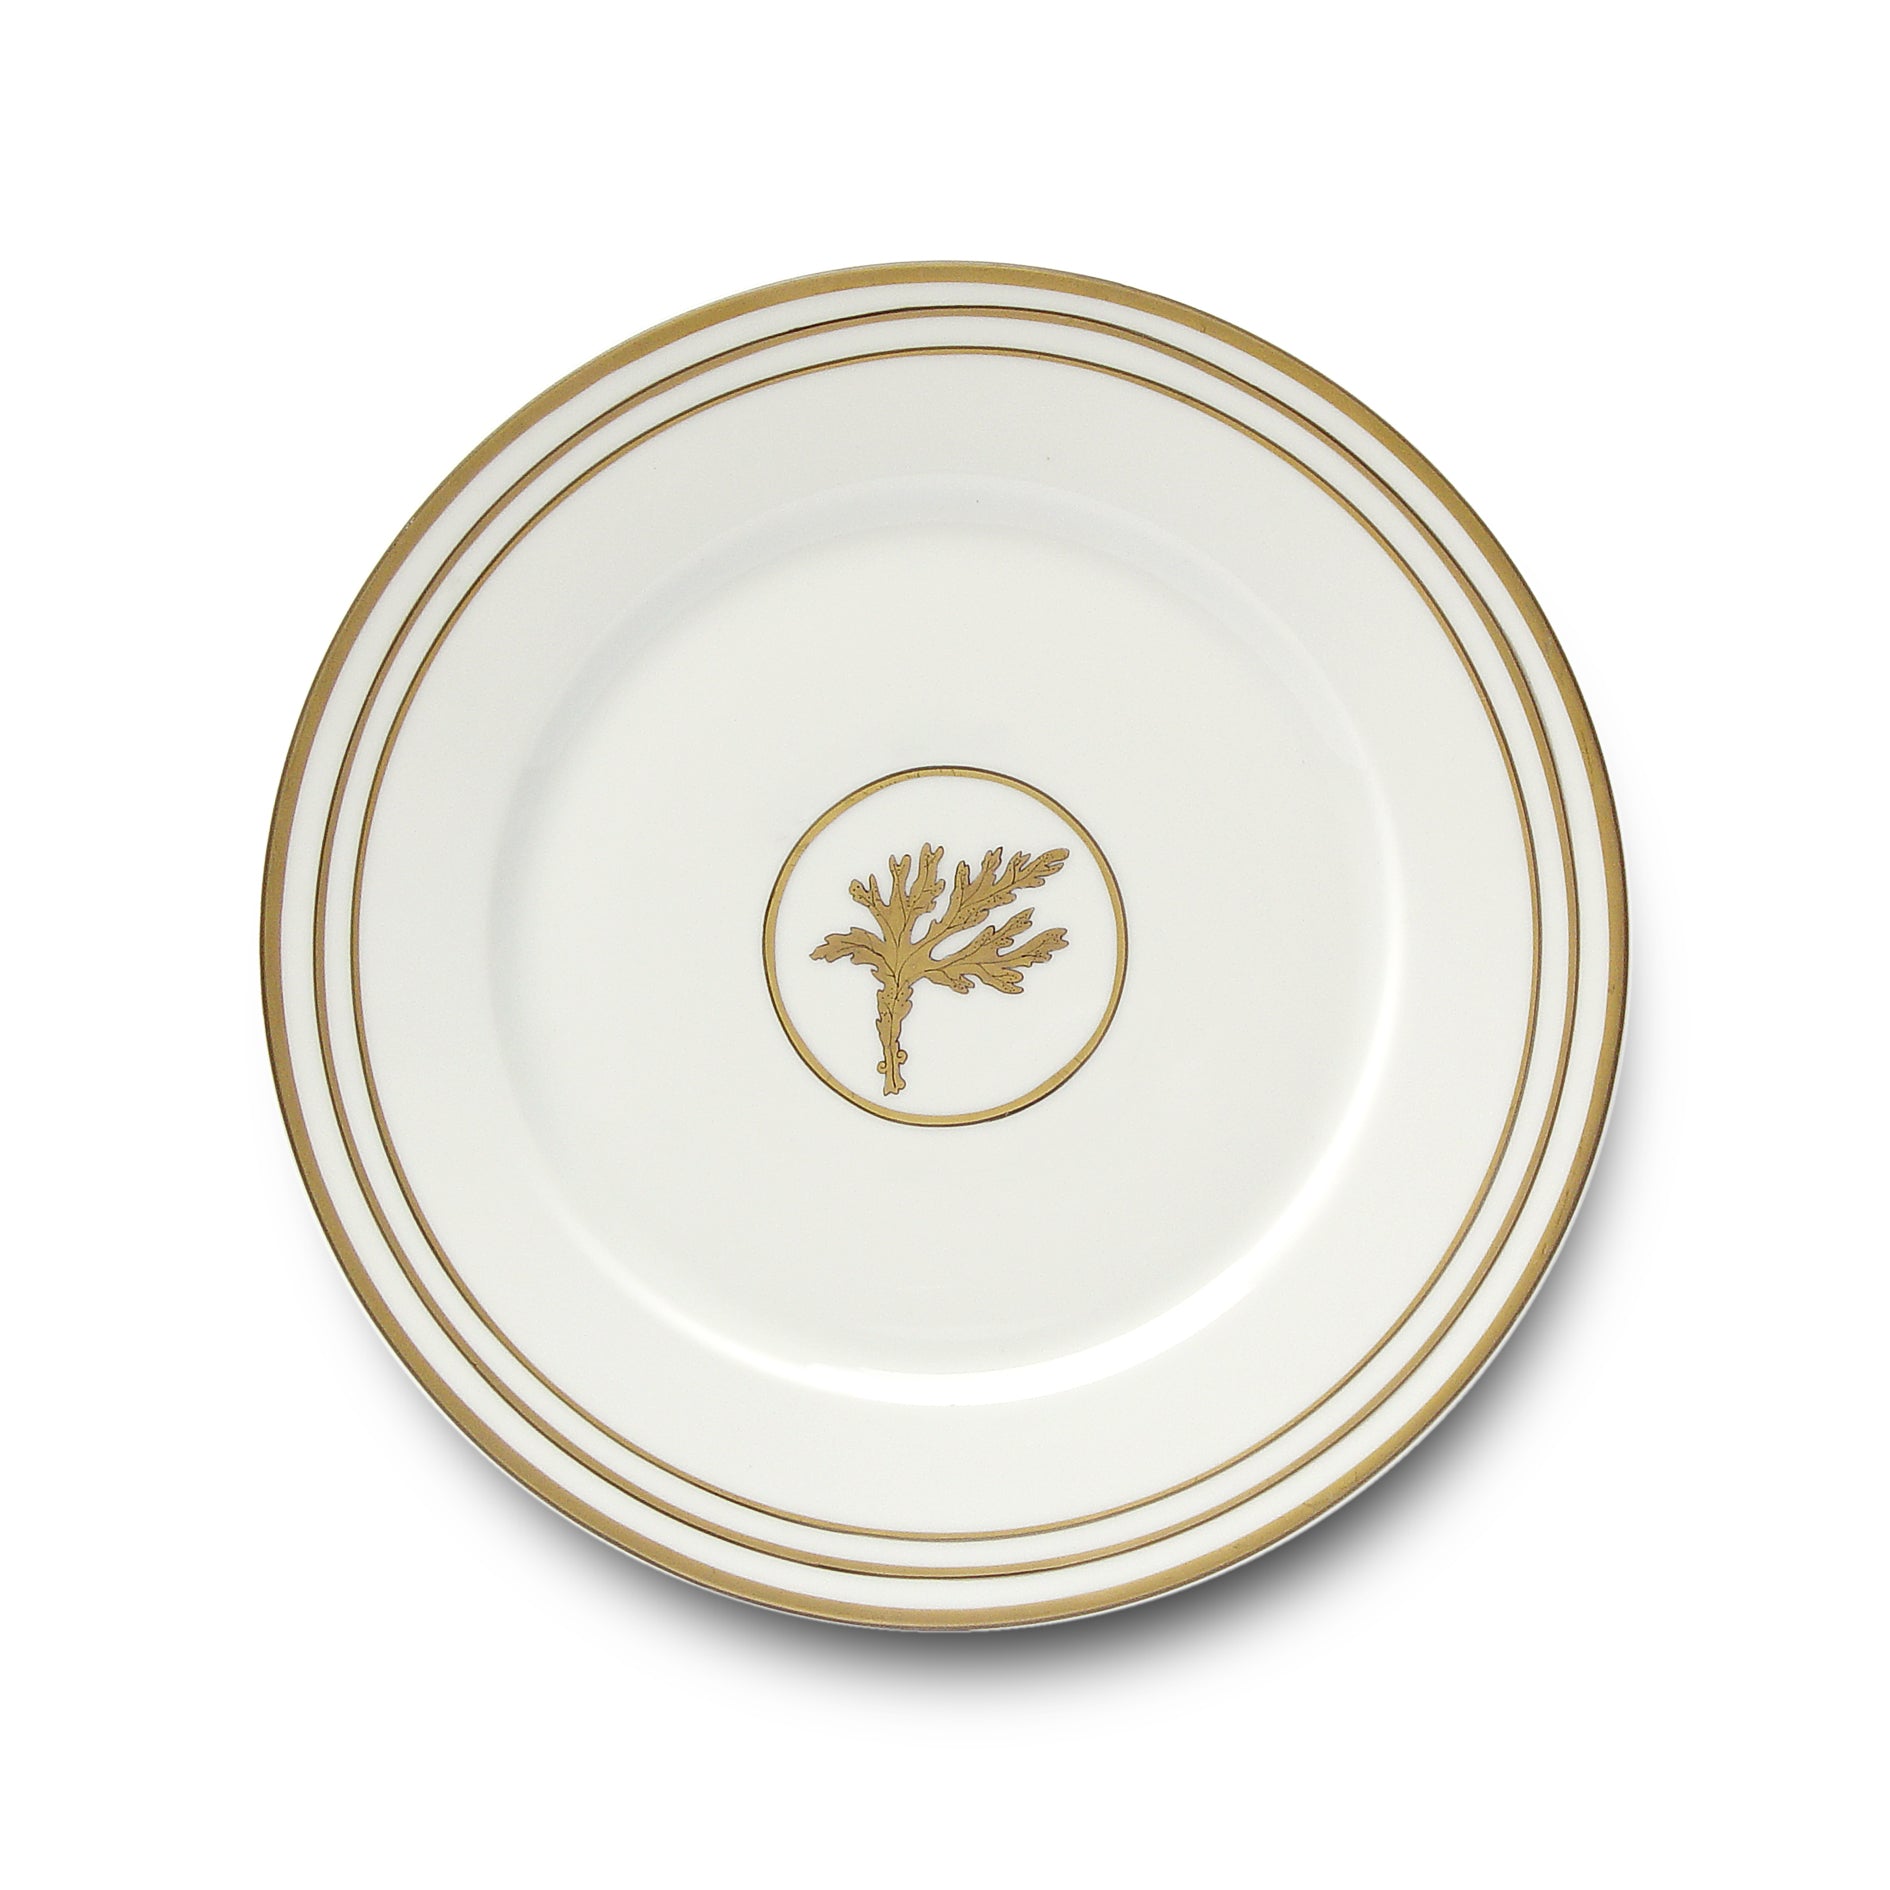 Or des Airs - Or des Mers - Dinner plate 06